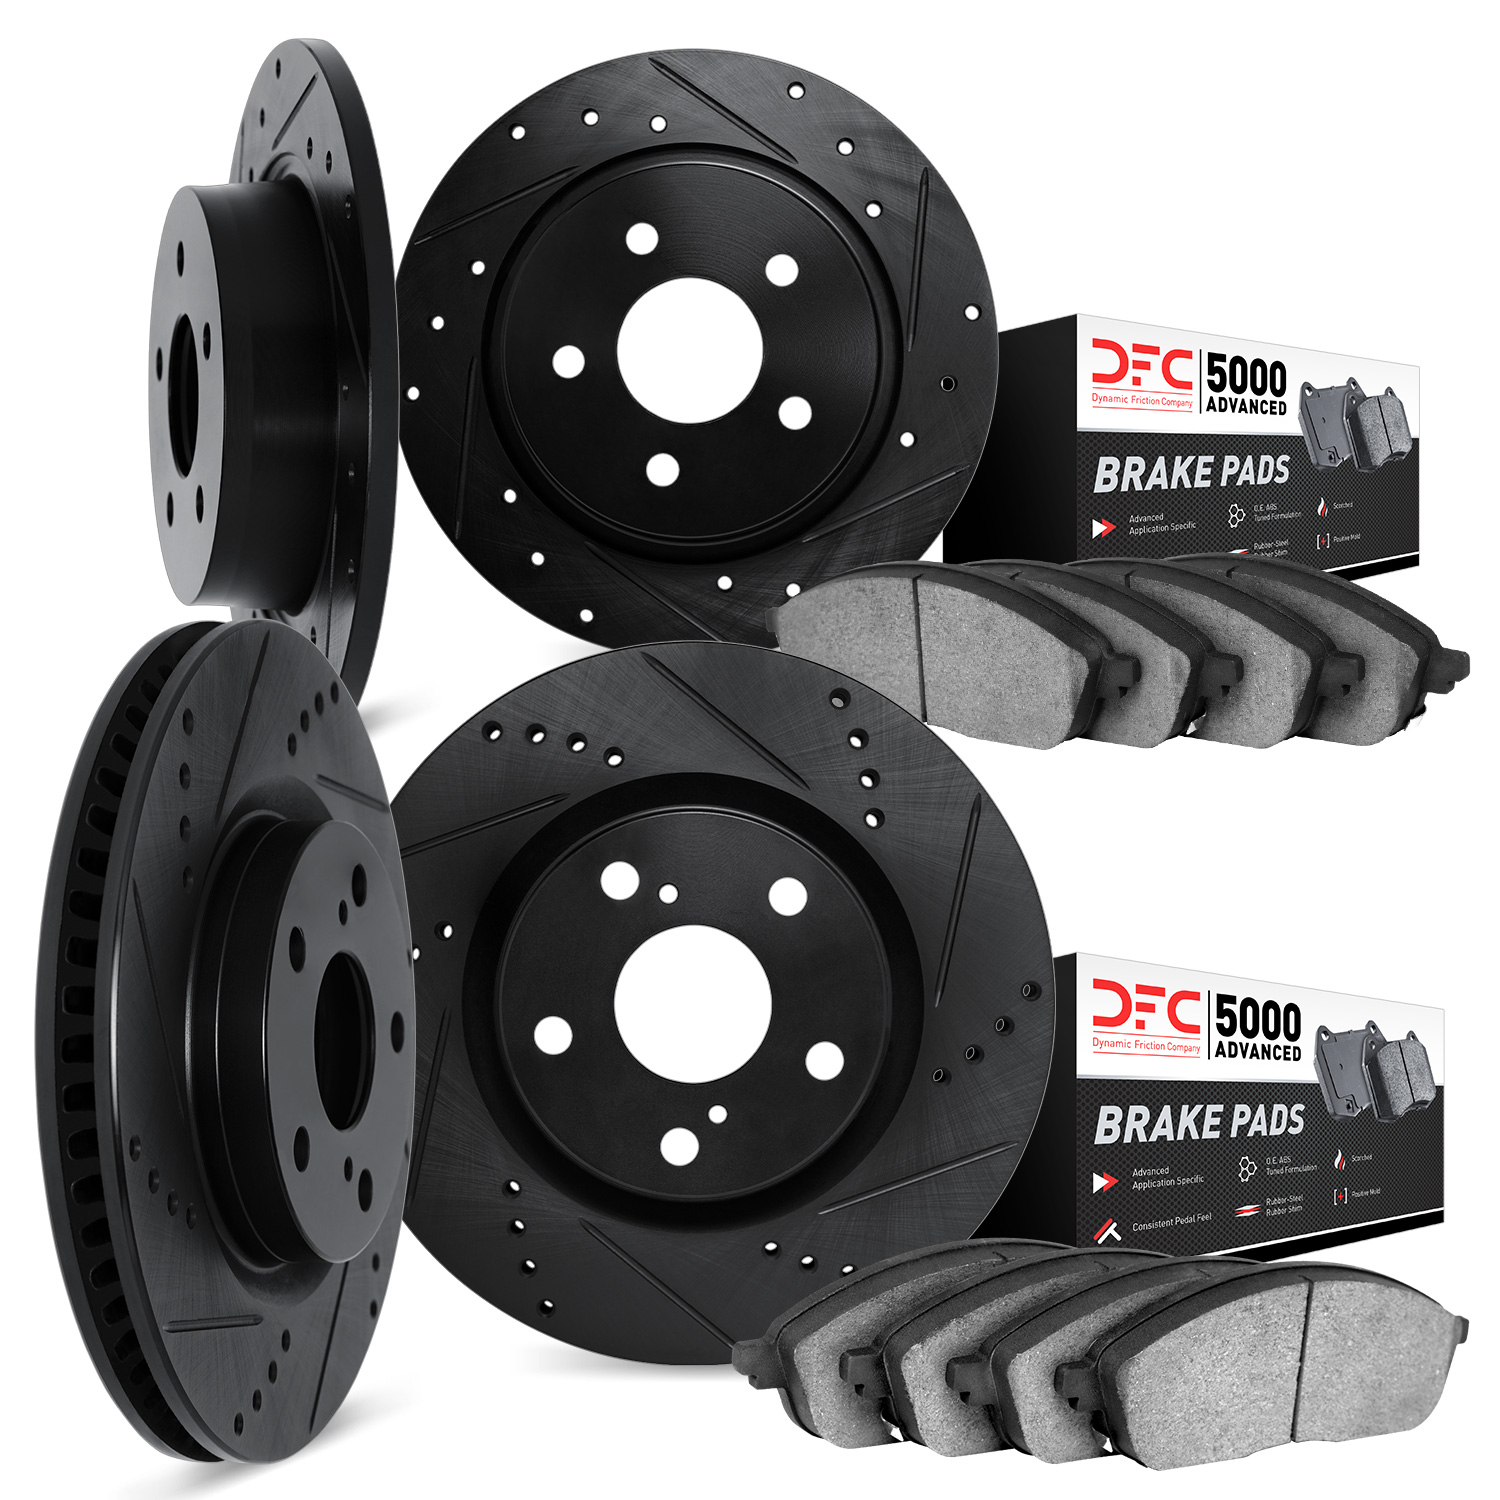 8504-59047 Drilled/Slotted Brake Rotors w/5000 Advanced Brake Pads Kit [Black], 1995-1998 Acura/Honda, Position: Front and Rear